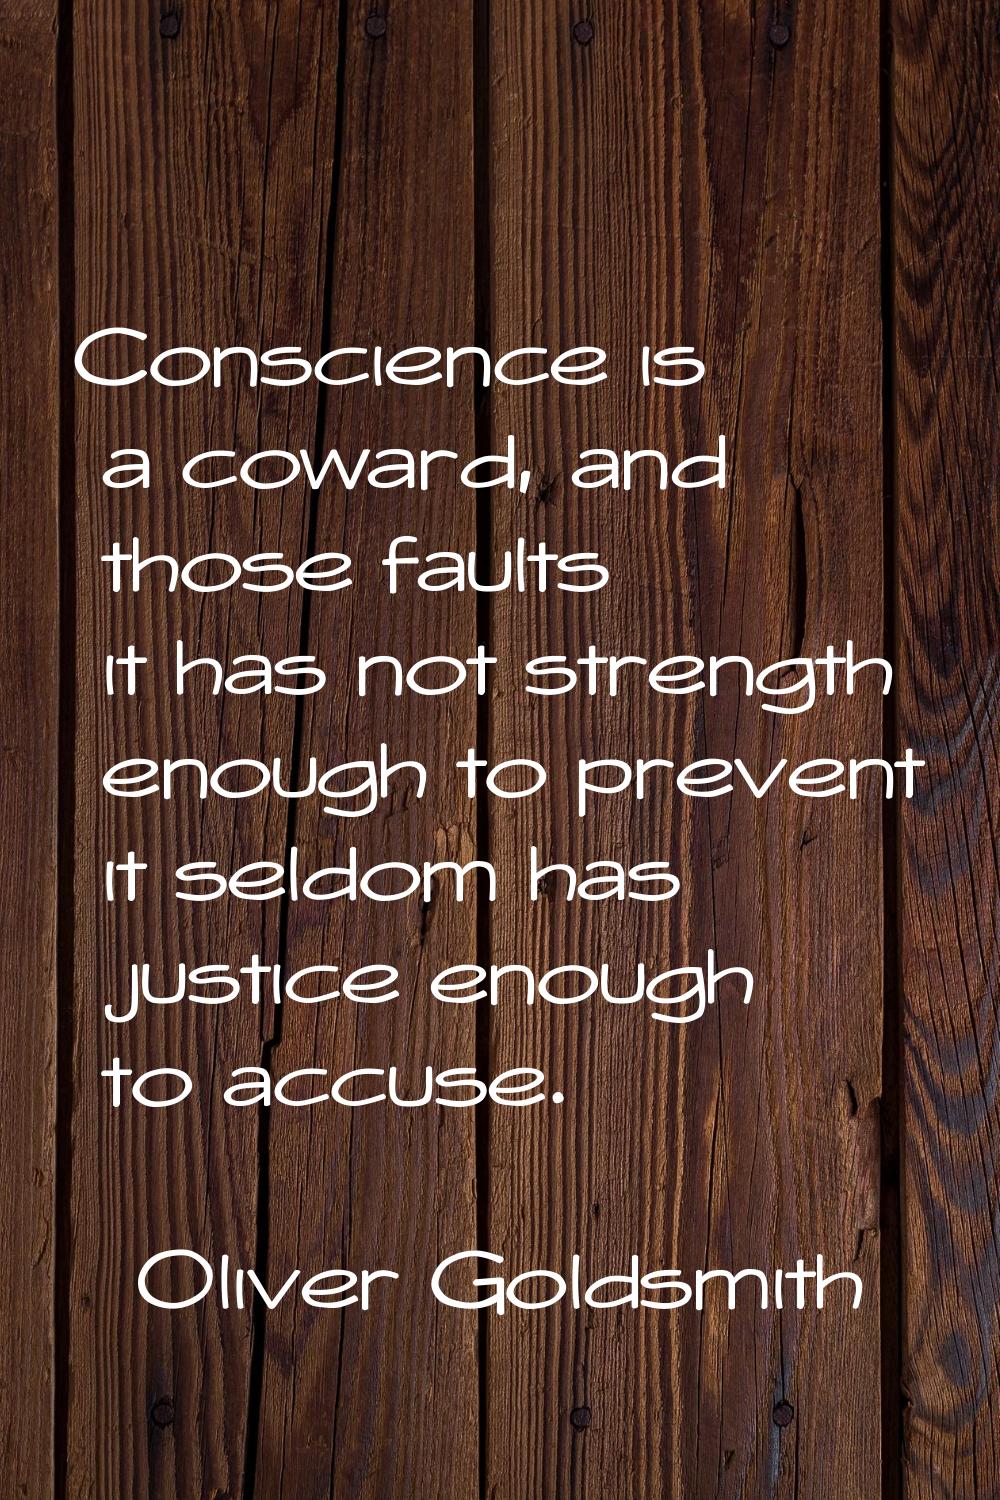 Conscience is a coward, and those faults it has not strength enough to prevent it seldom has justic